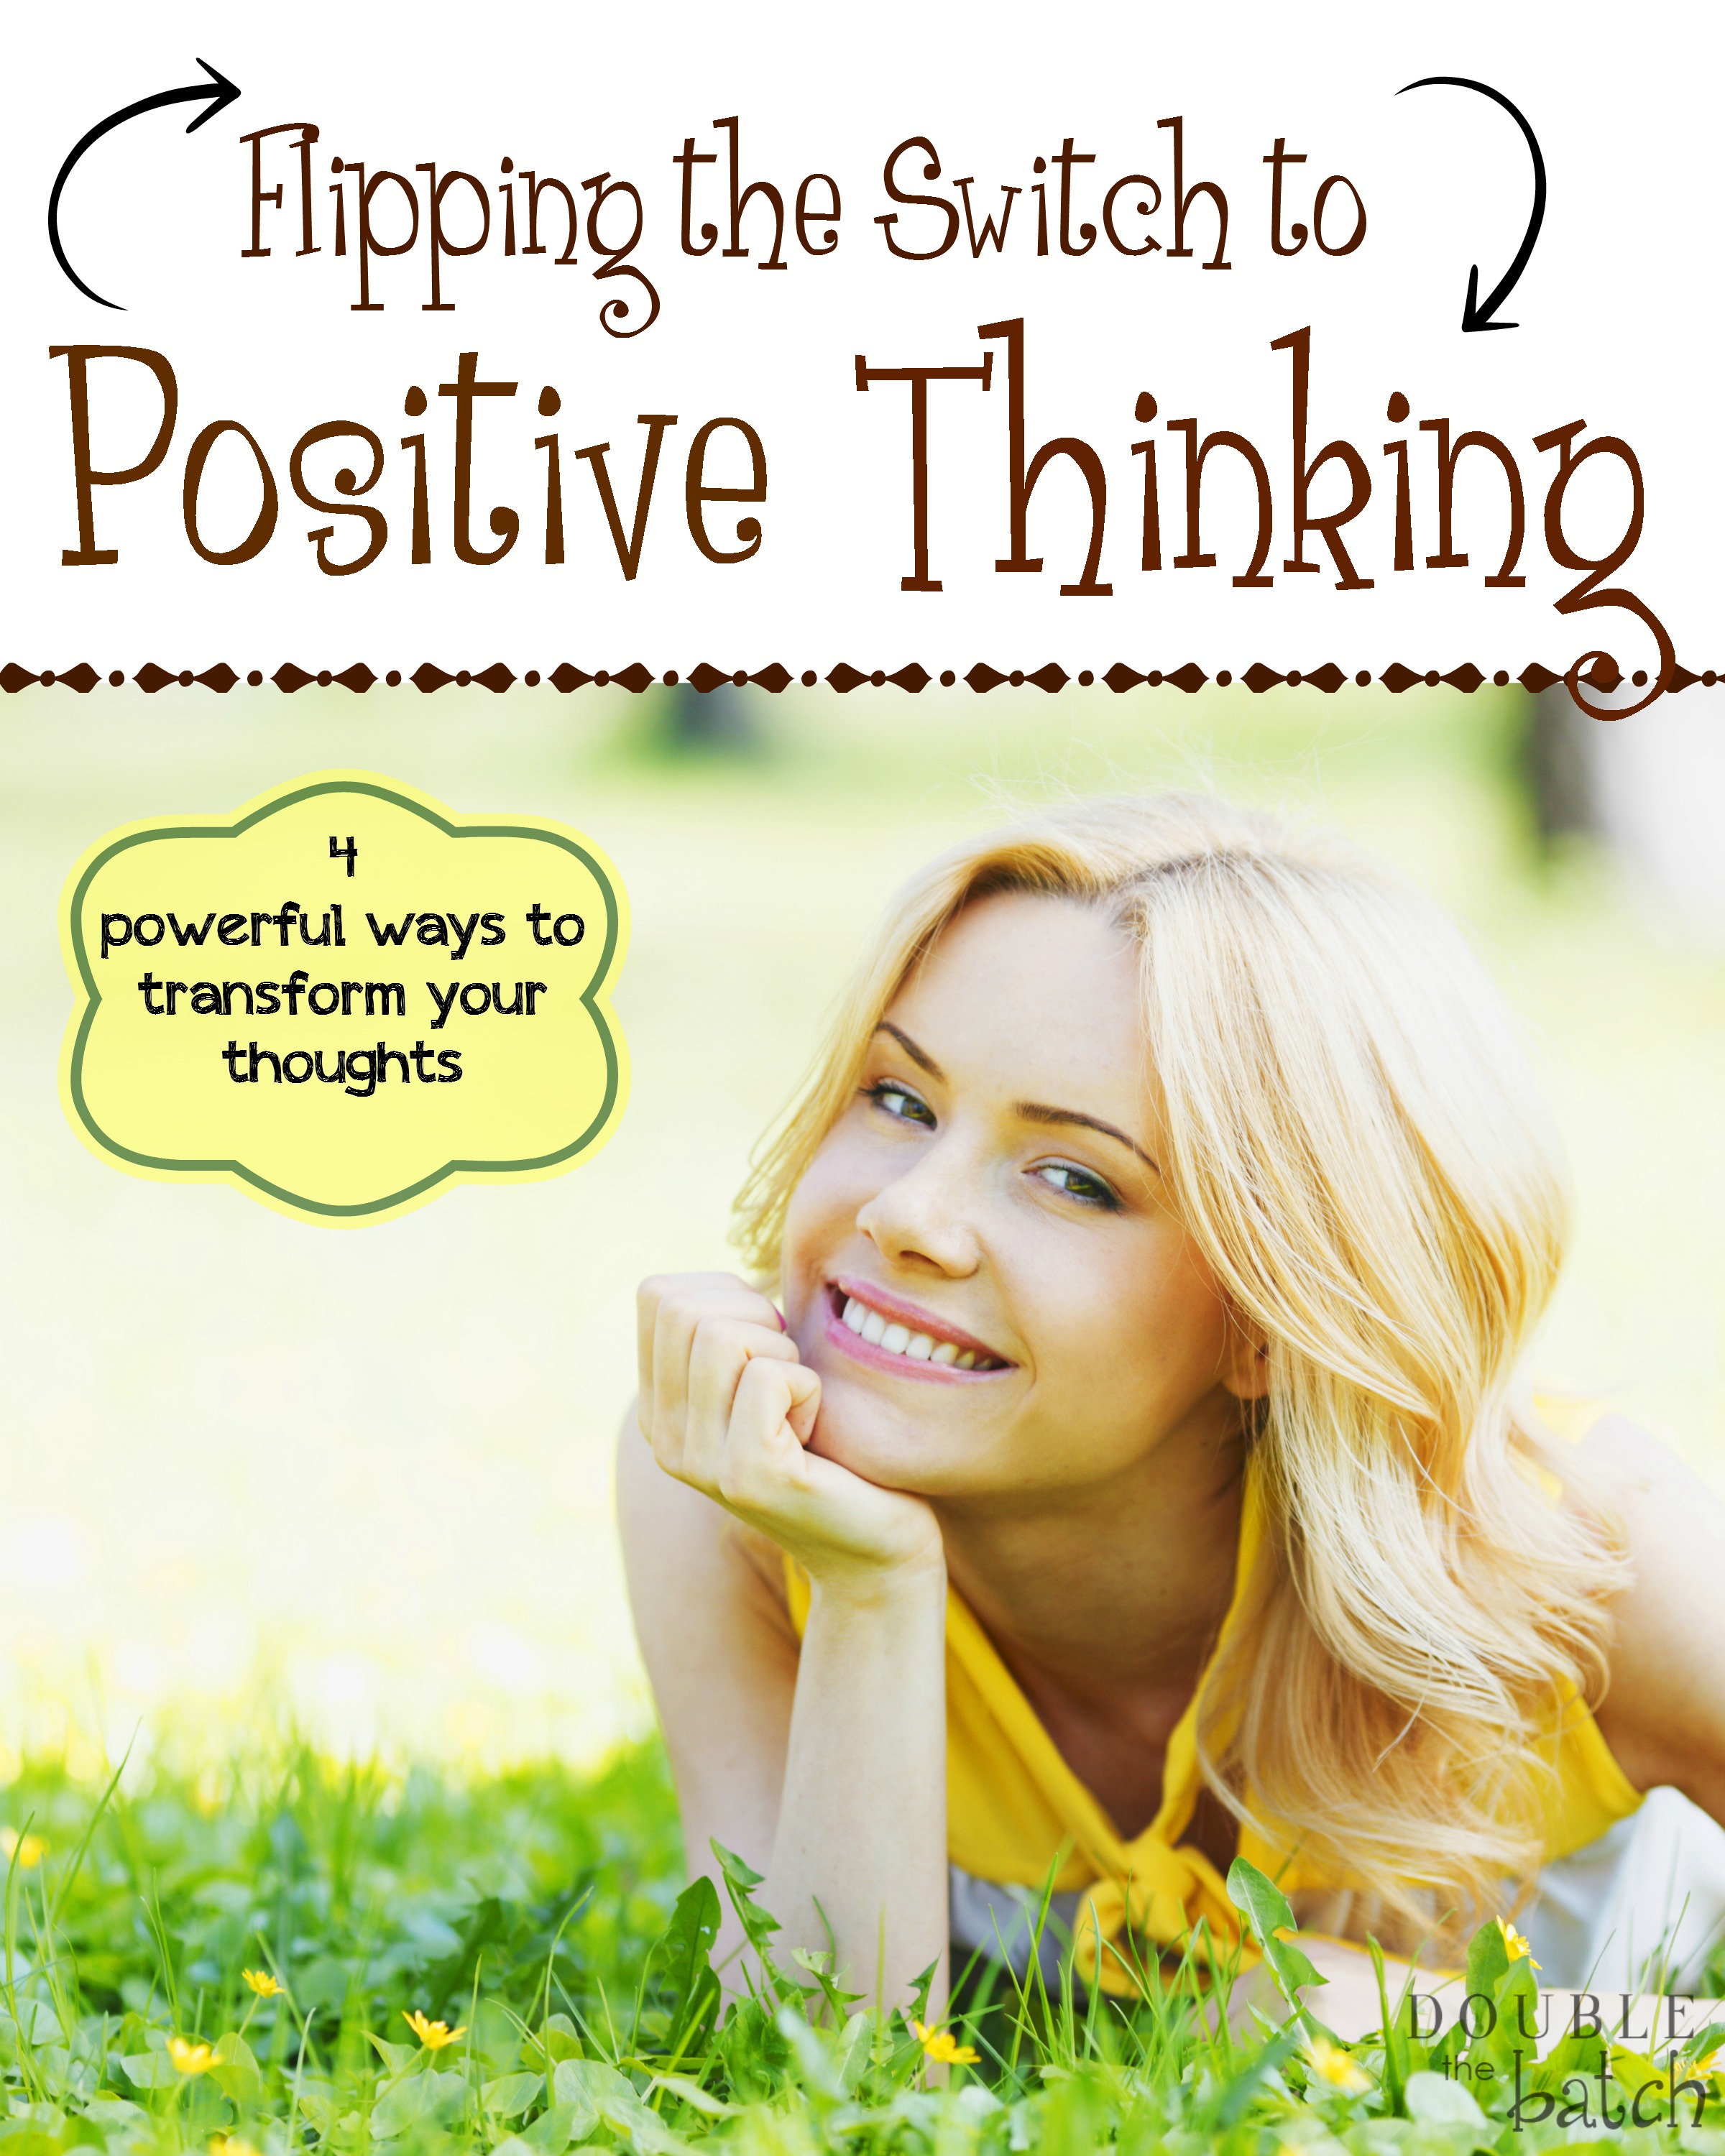 How to Get Rid of Negative Thoughts: Flipping the Switch to Positive Thoughts